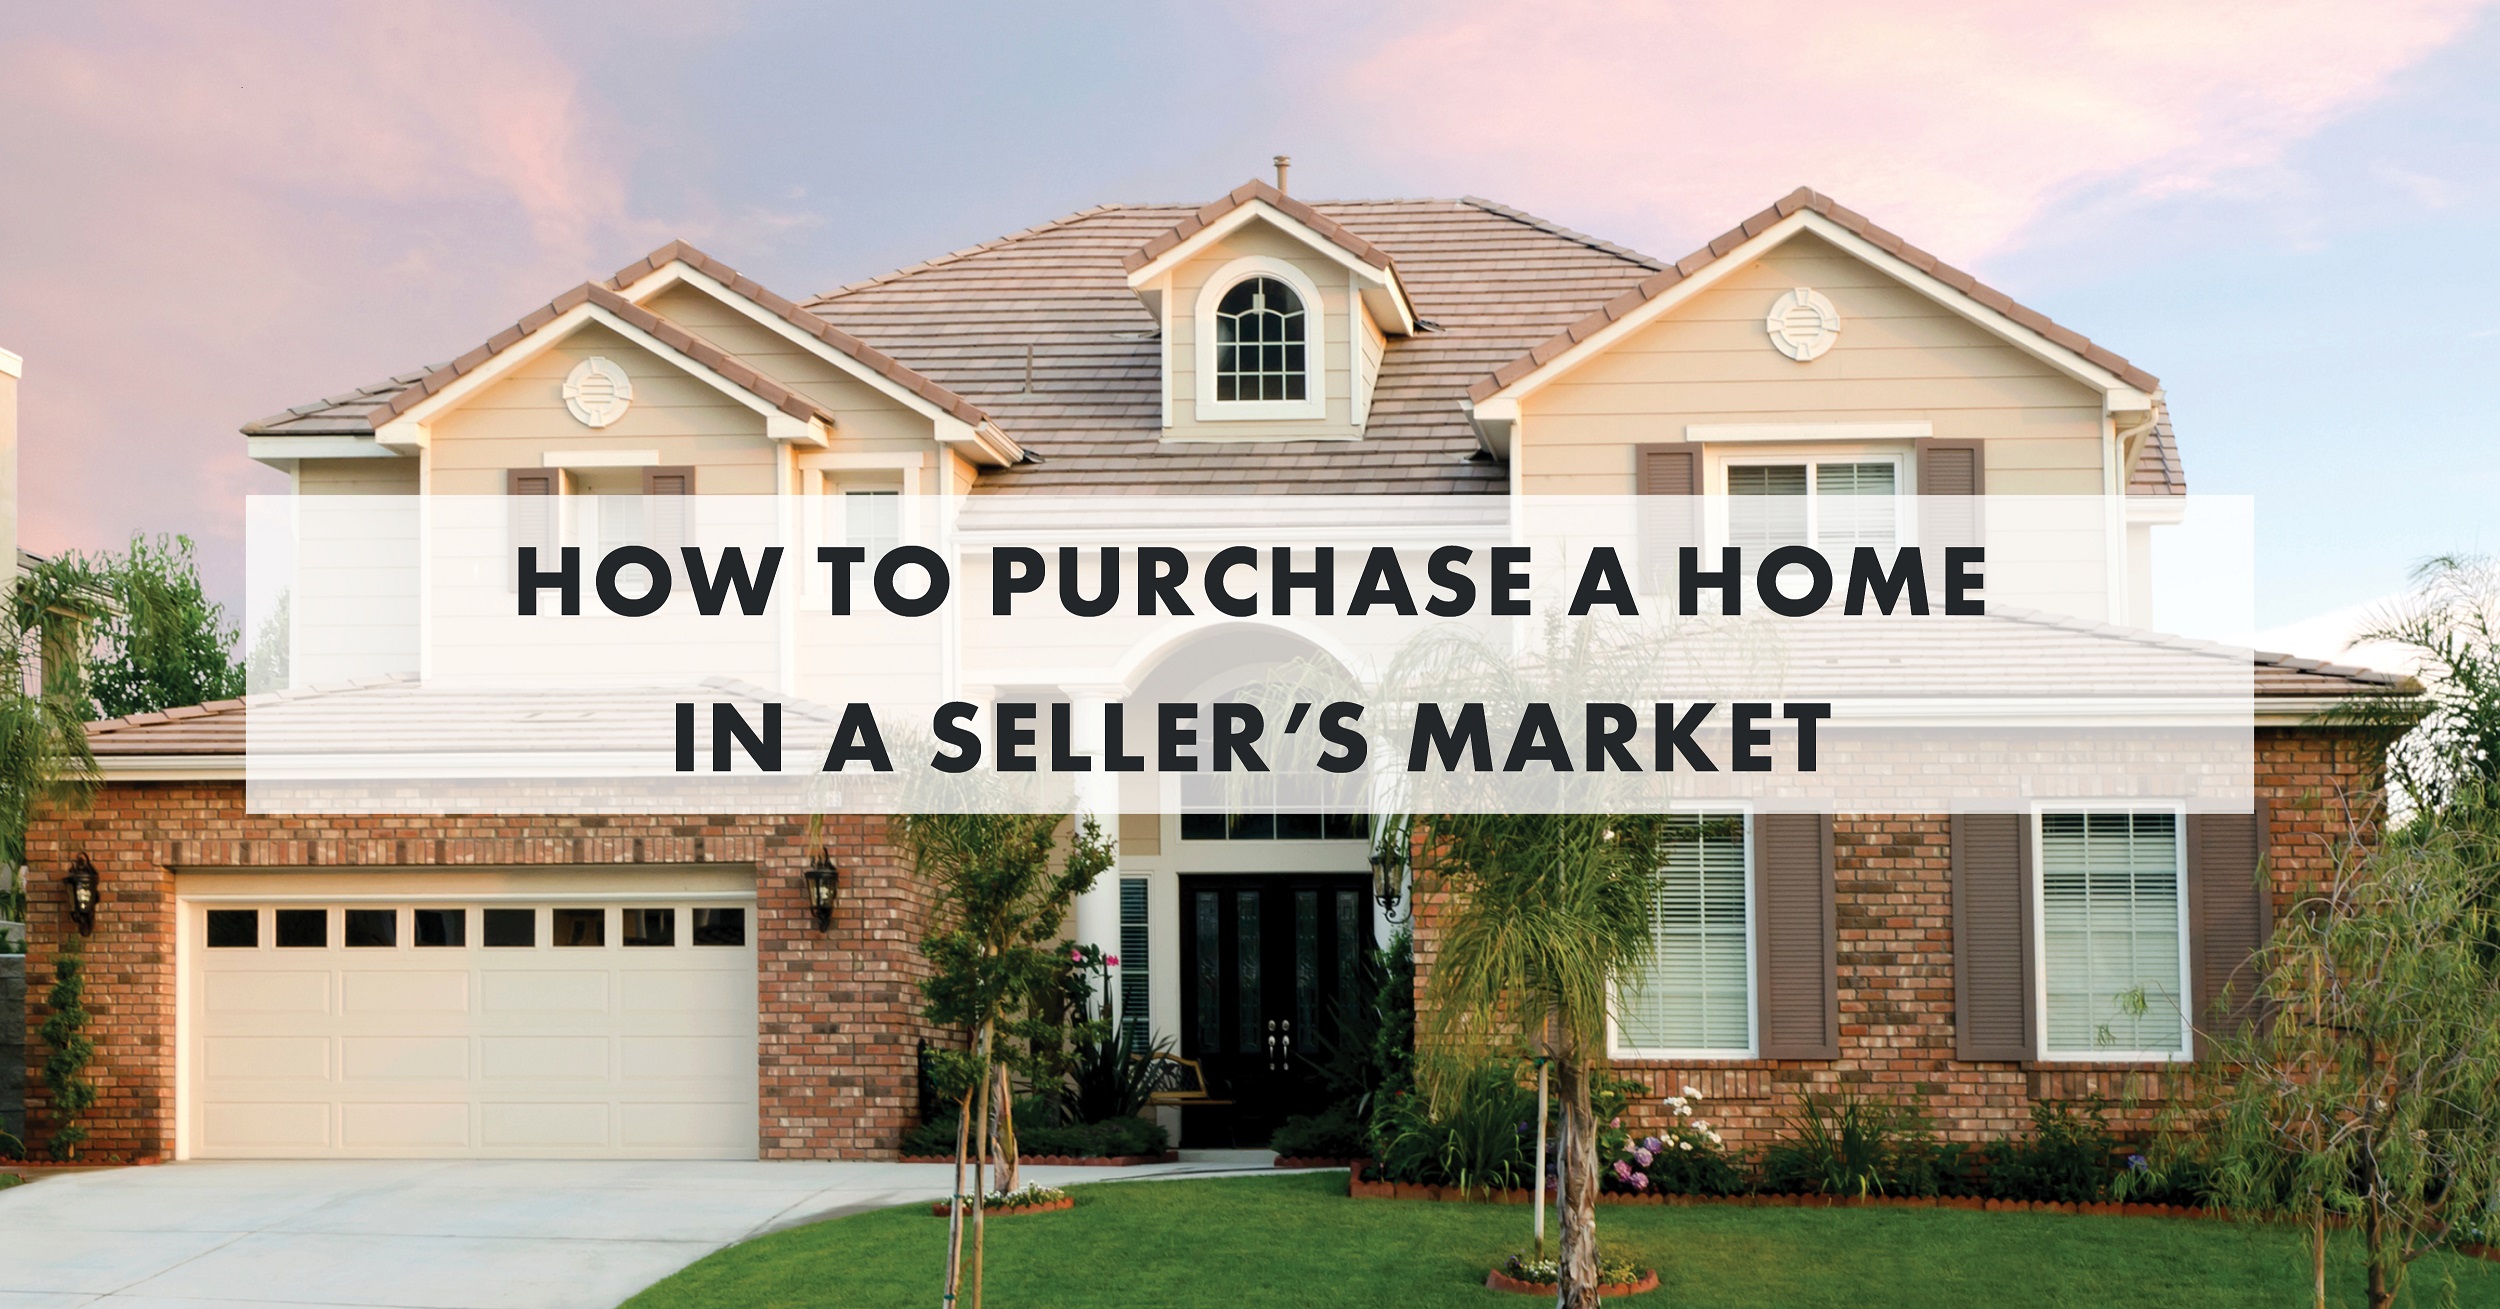 How to Purchase a Home in a Seller's Market